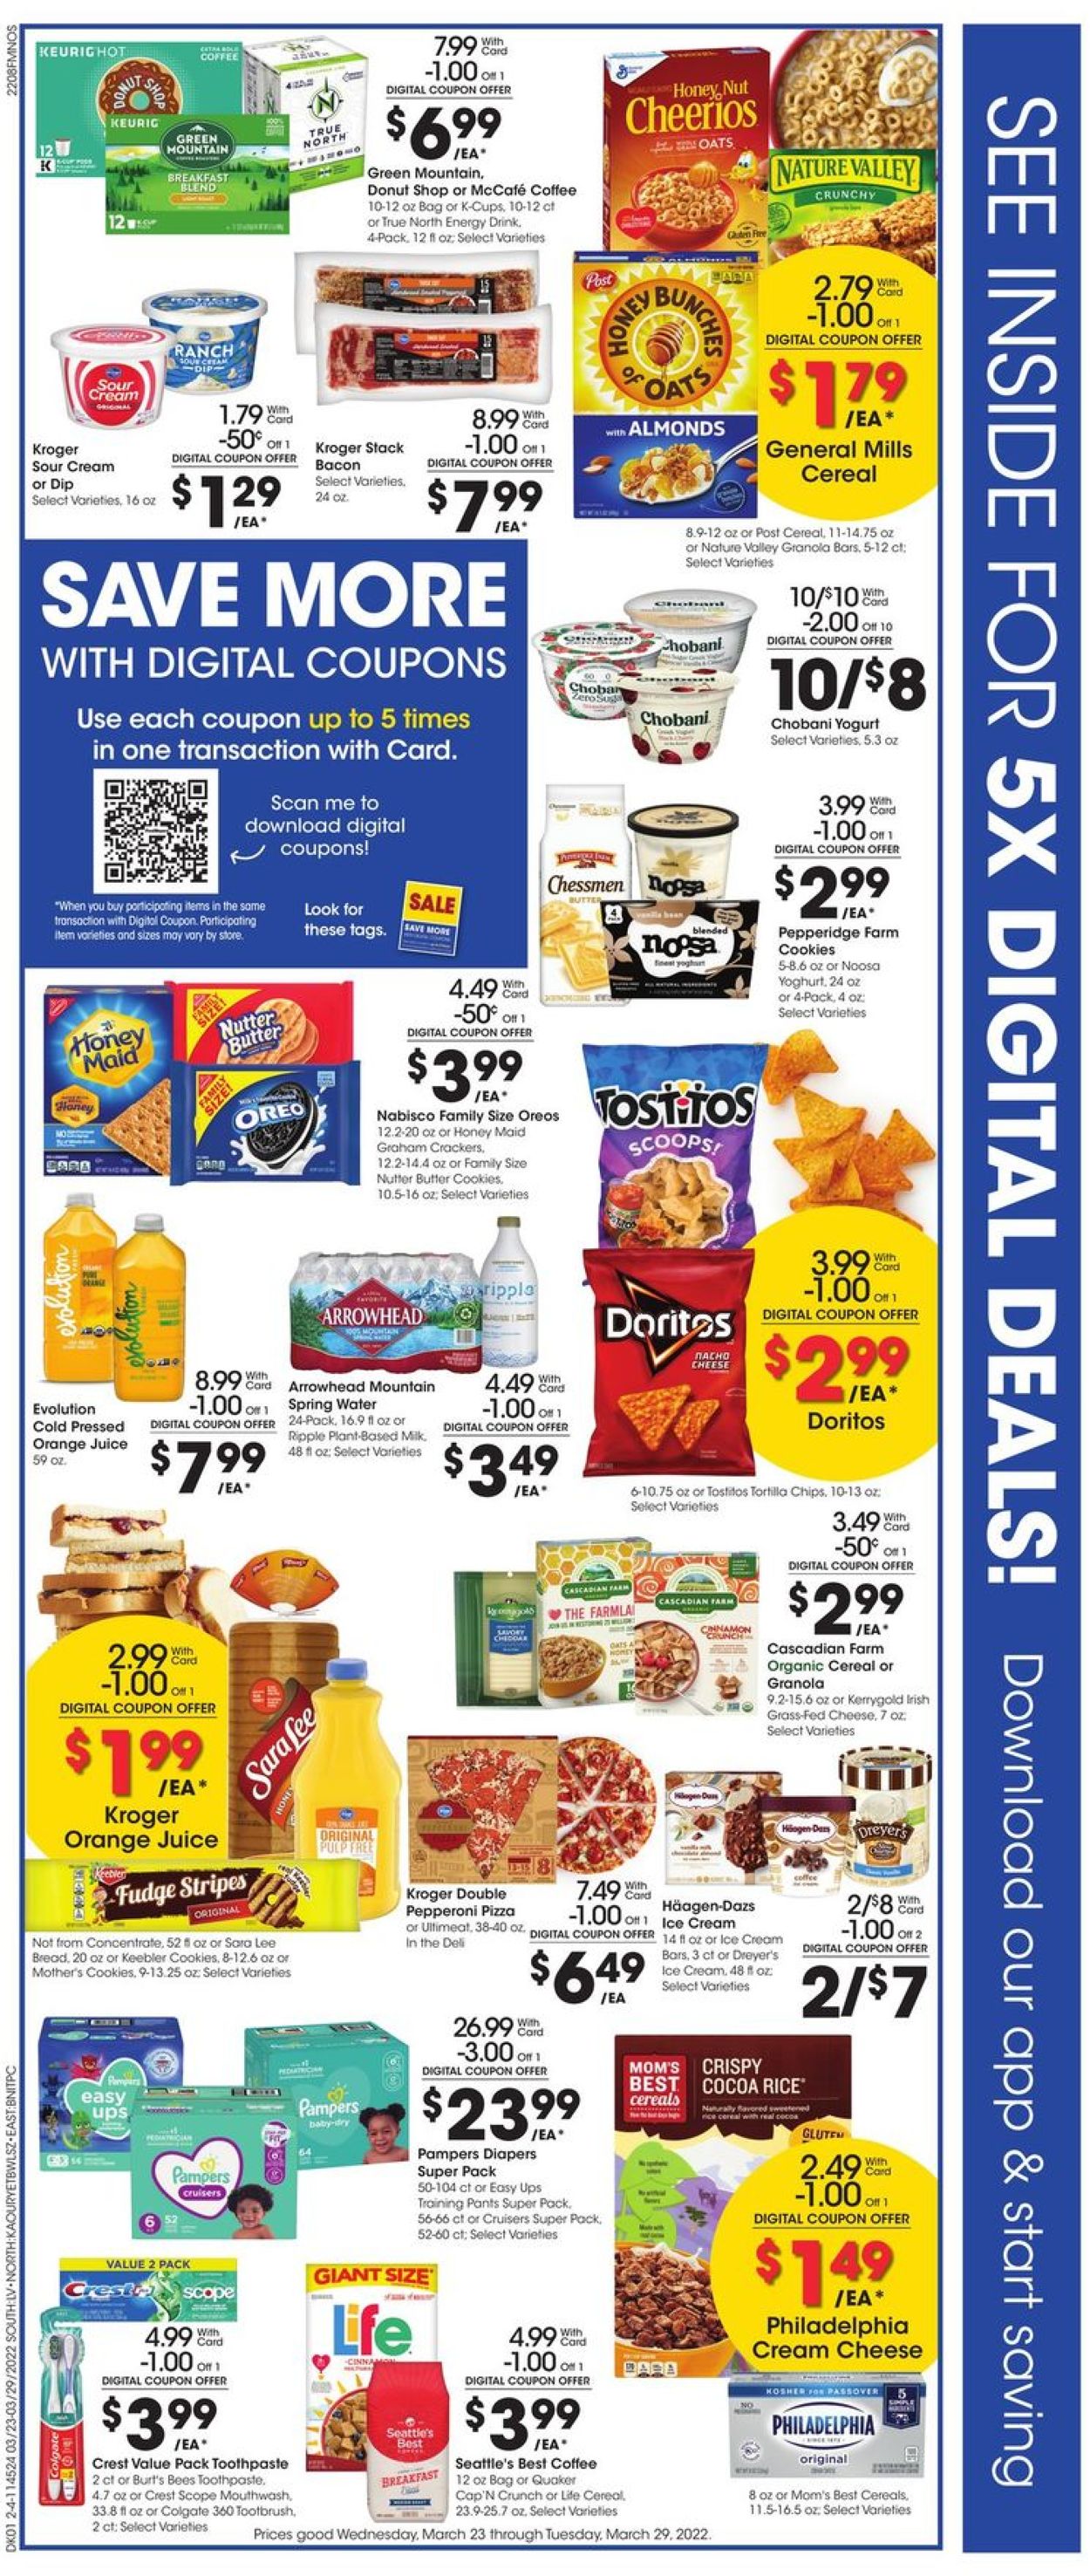 Fred Meyer Weekly Ad Circular - valid 03/23-03/29/2022 (Page 2)